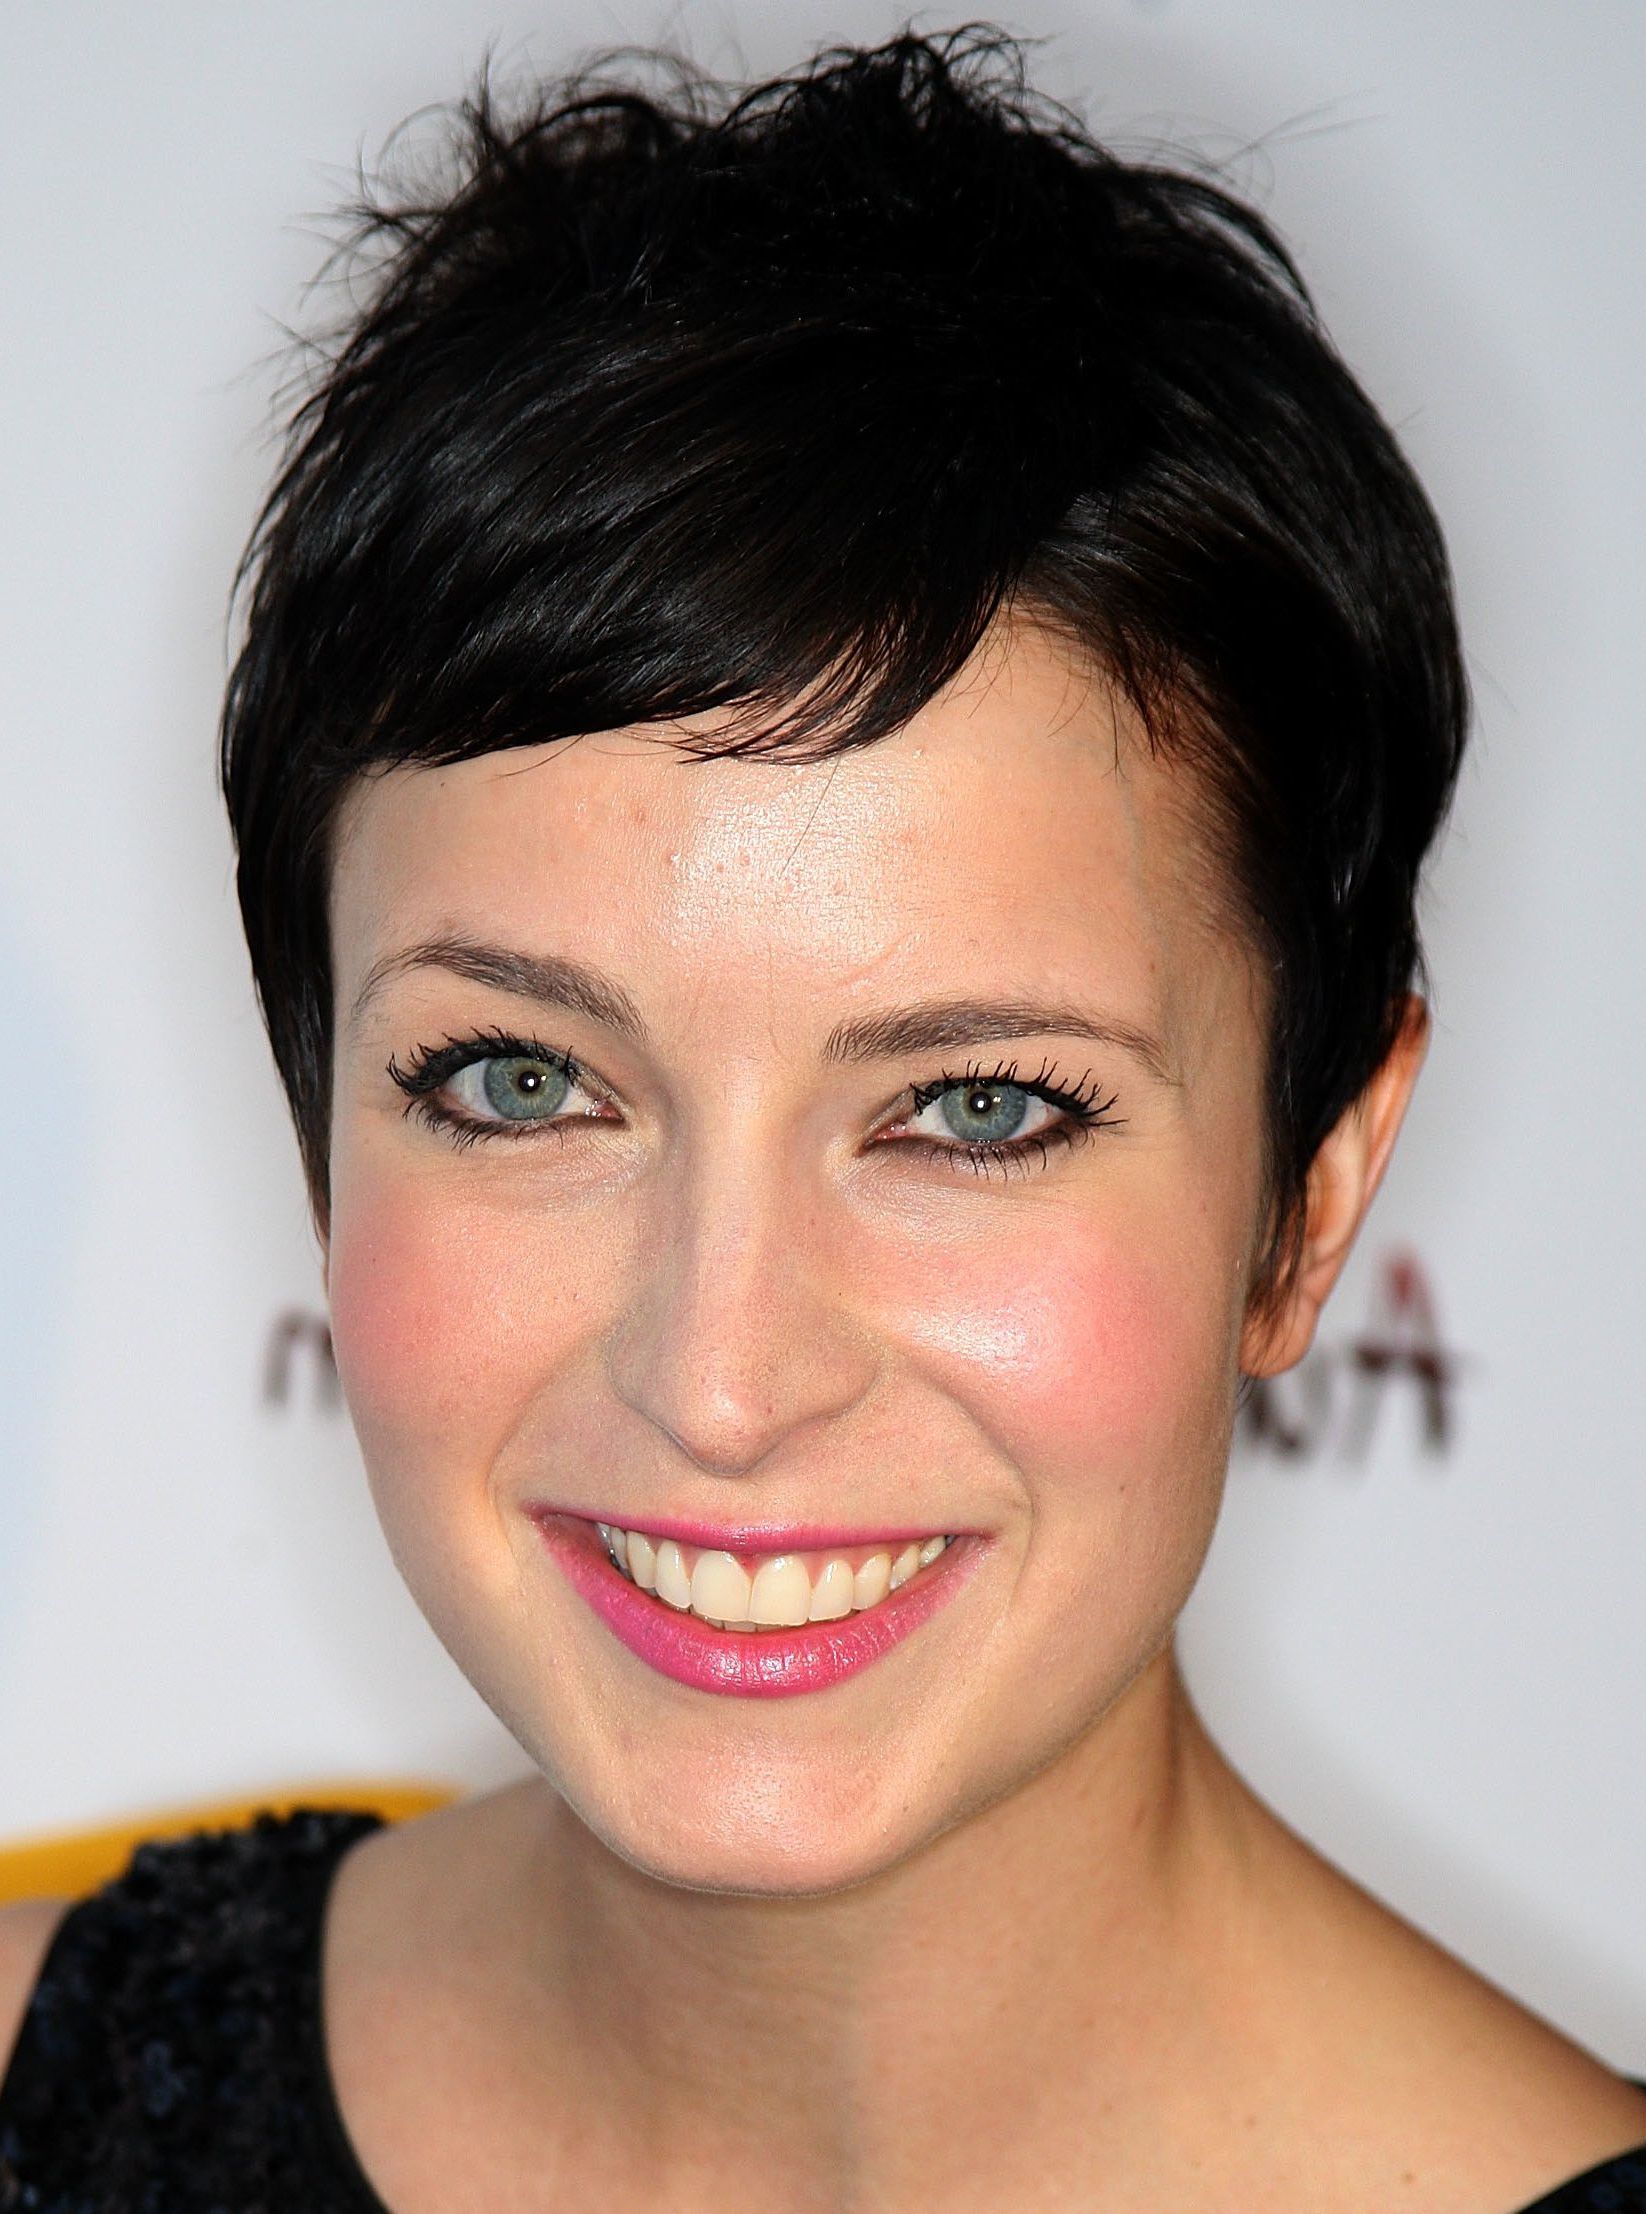 From Pixies To Shags: 18 Great Cuts For Short, Brown Hair With Dramatic Short Hairstyles (Photo 18 of 25)